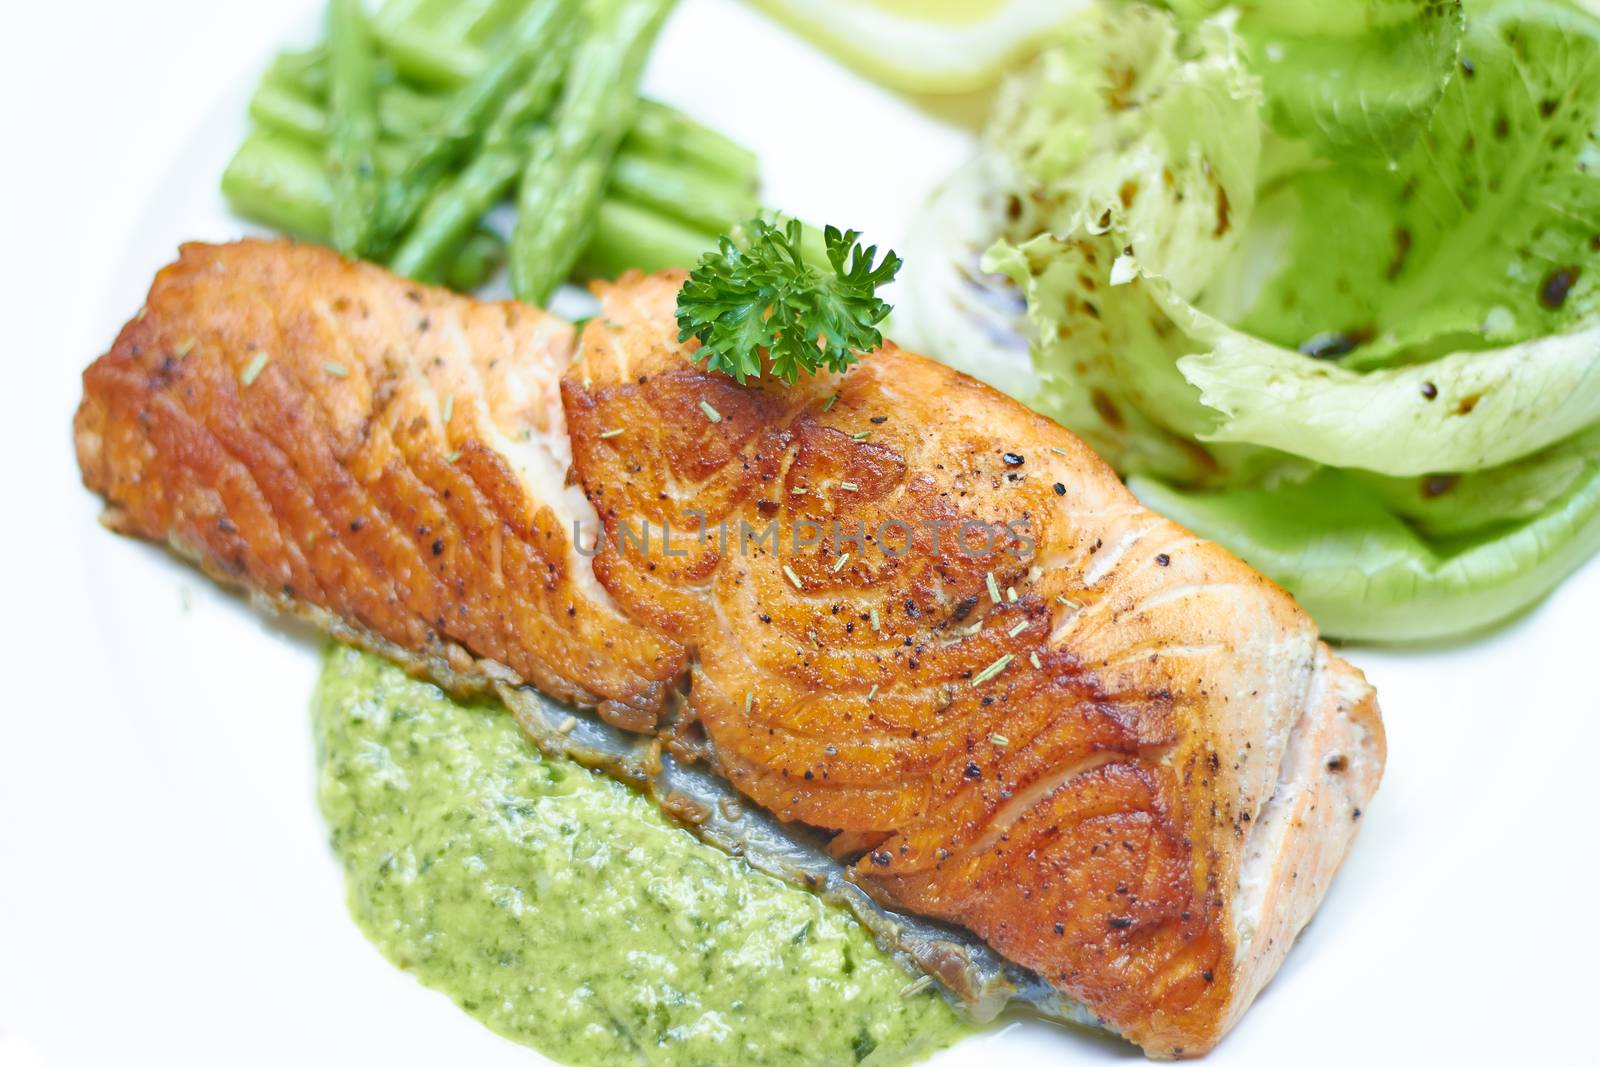 Grilled salmon with salsa verde by wyoosumran